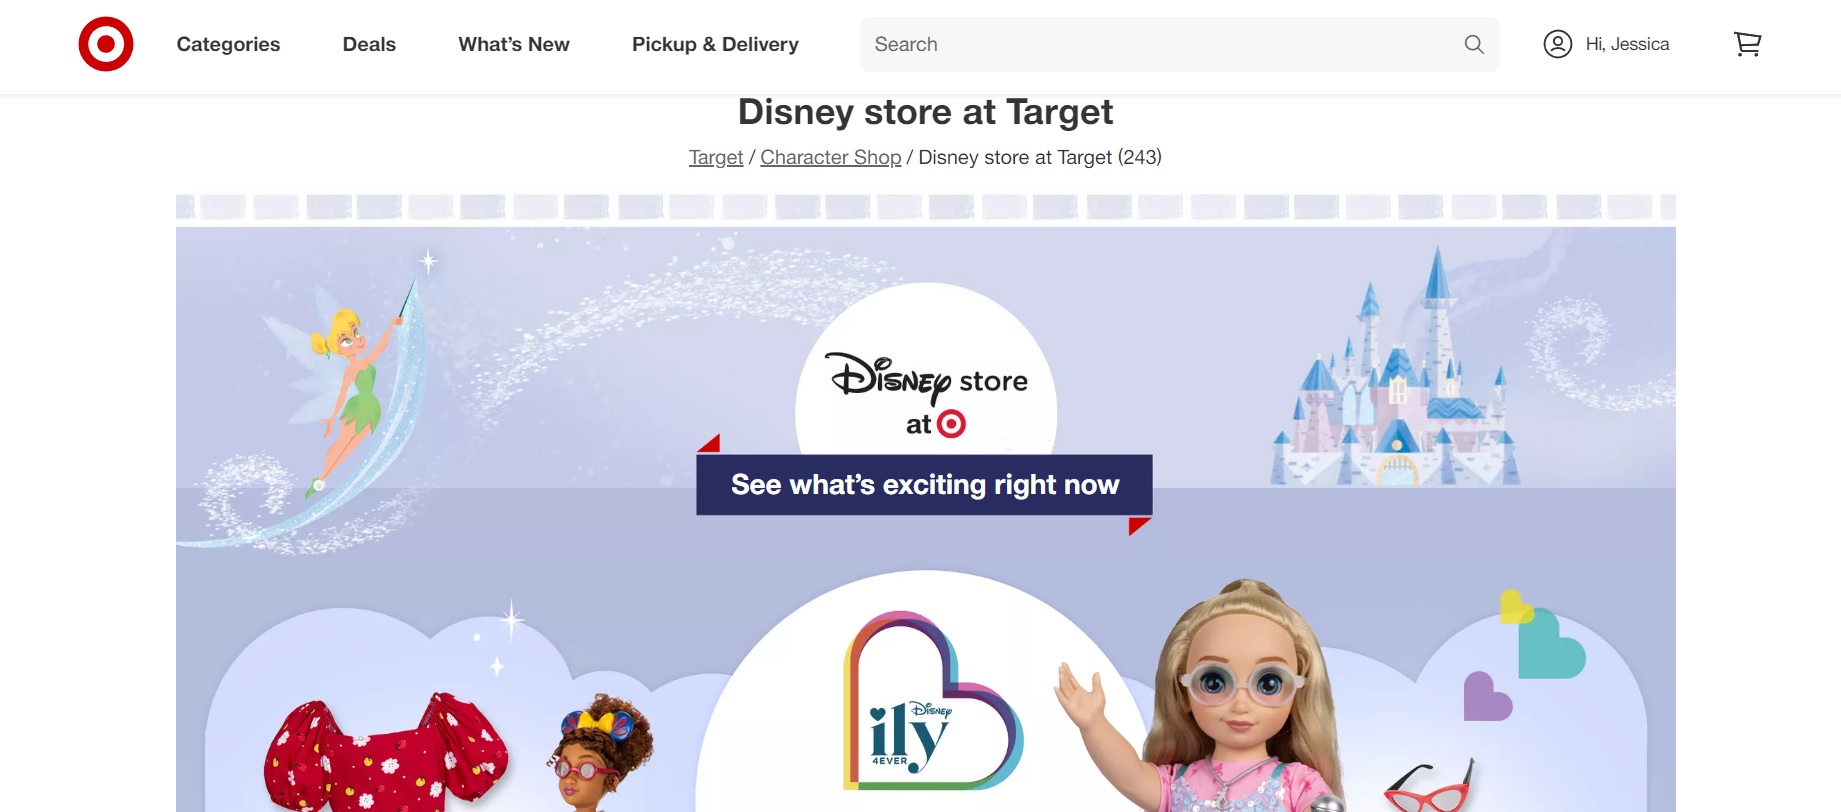 Disney Store Products at Target